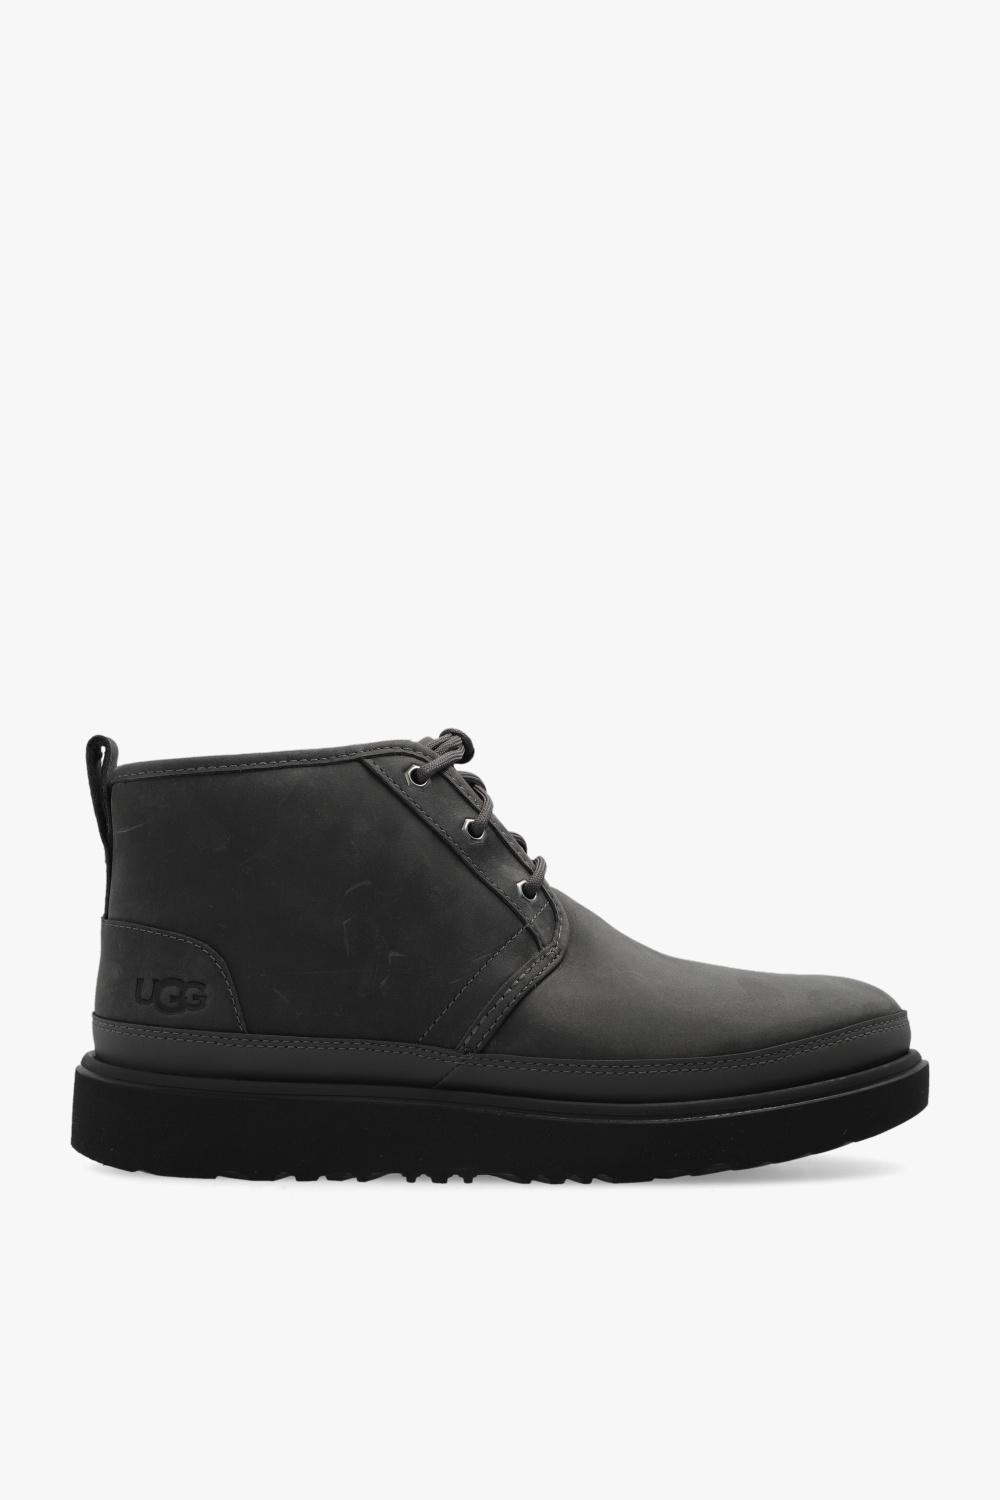 UGG 'neumel Weather Ii' Lace-up Ankle Boots in Grey for Men | Lyst UK